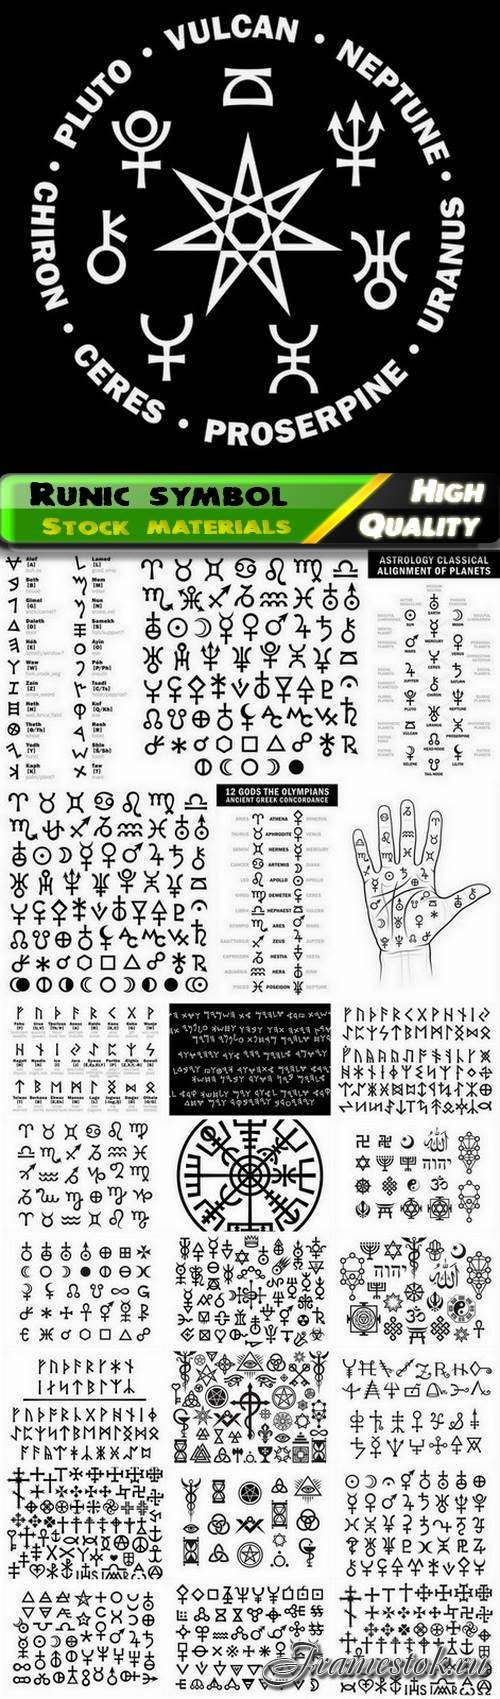 Phoenician runic letters and medieval alchemical symbol - 25 Eps